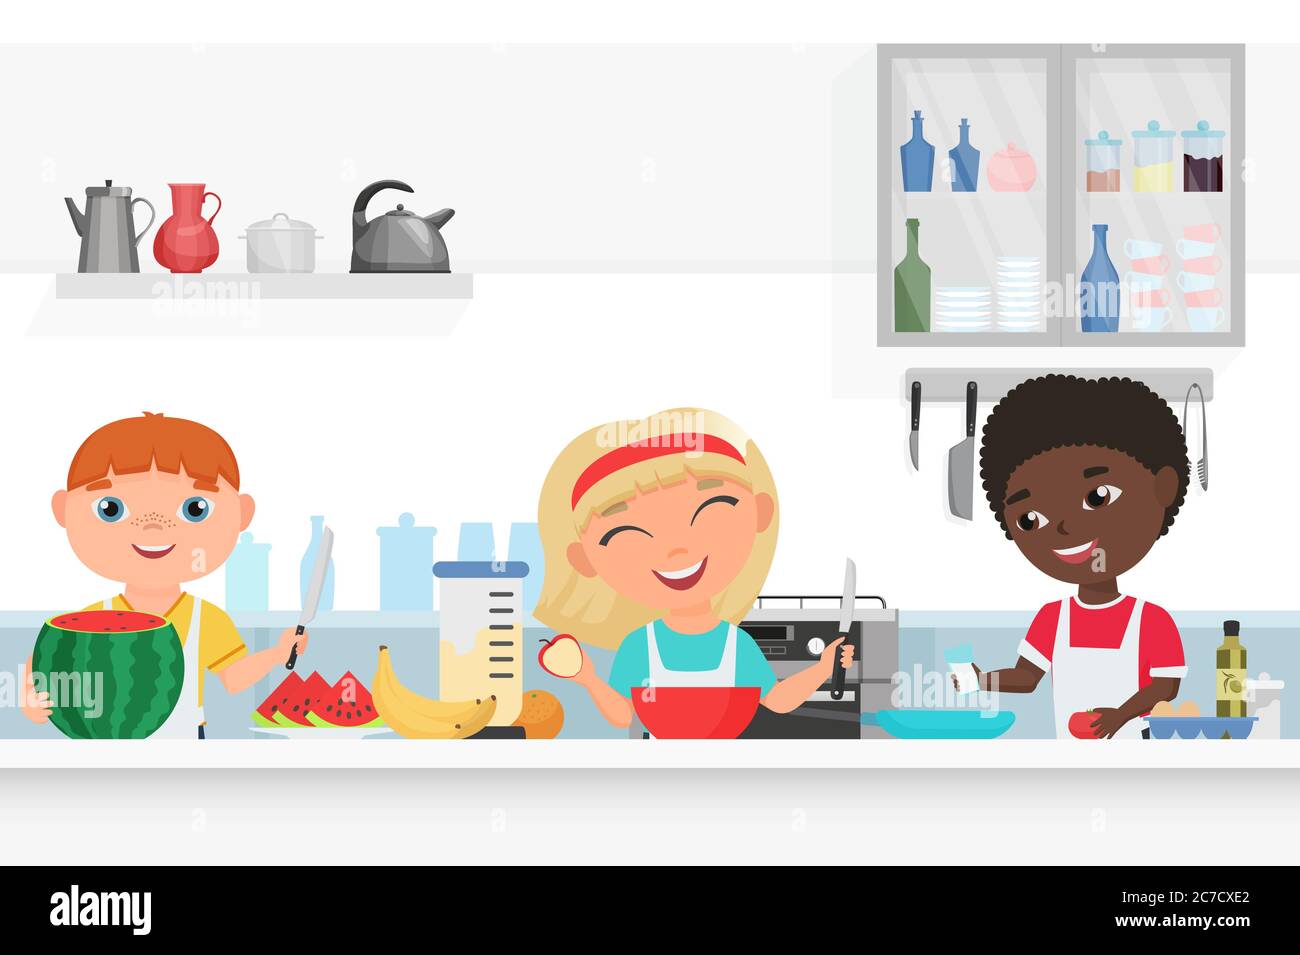 Cute Boy and Girl kids chef cooking in the kitchen vector illustration. Stock Vector